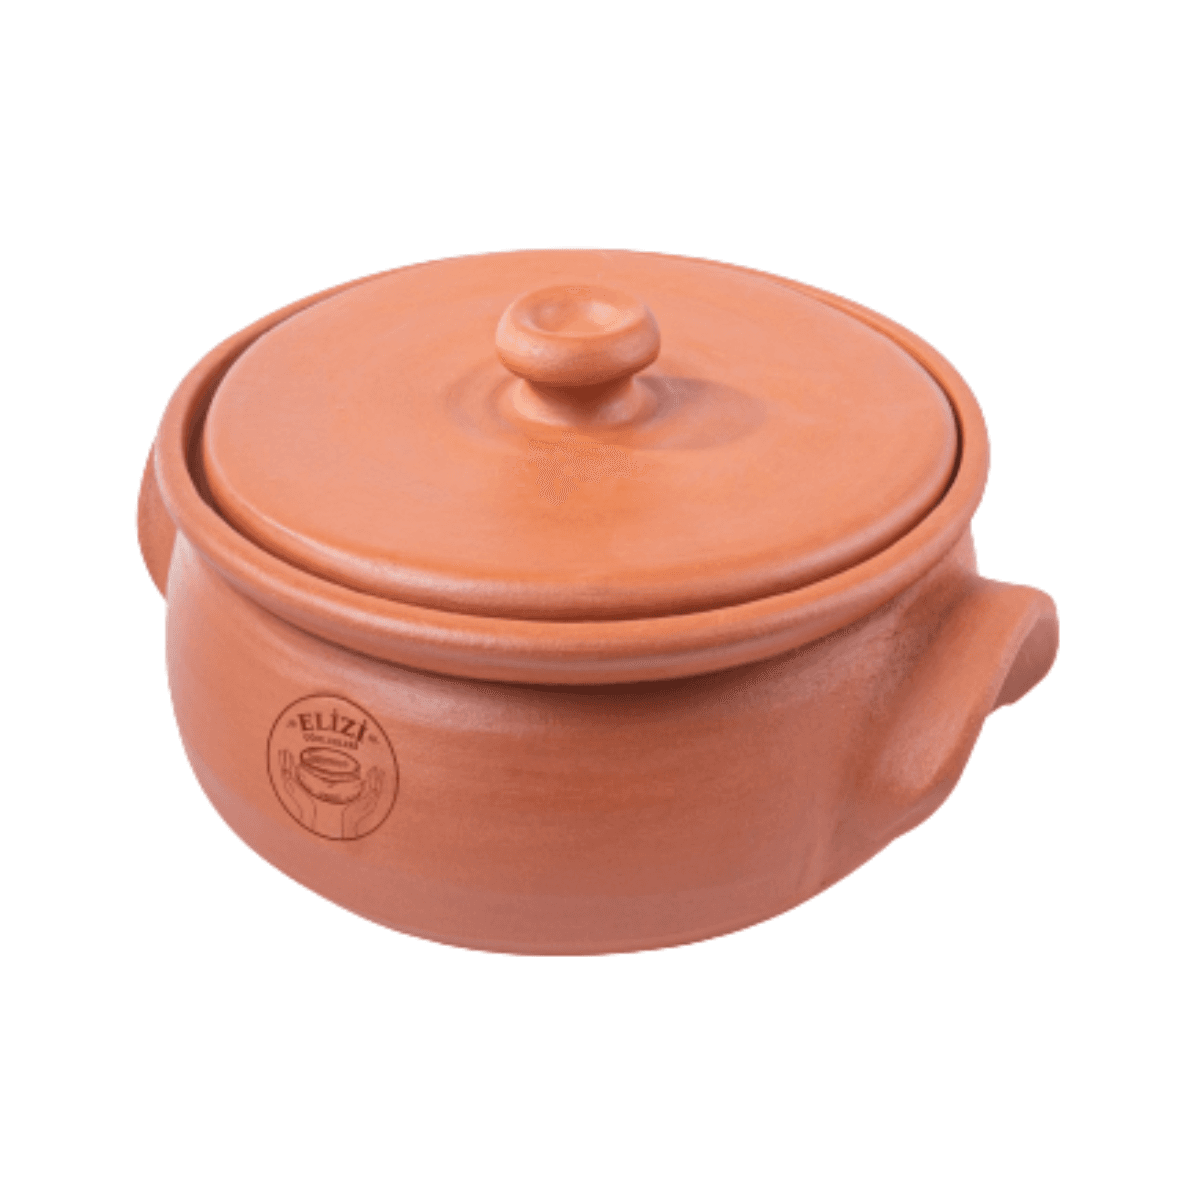 Elizi Clay Lined Pot 25 cm Brown Clay